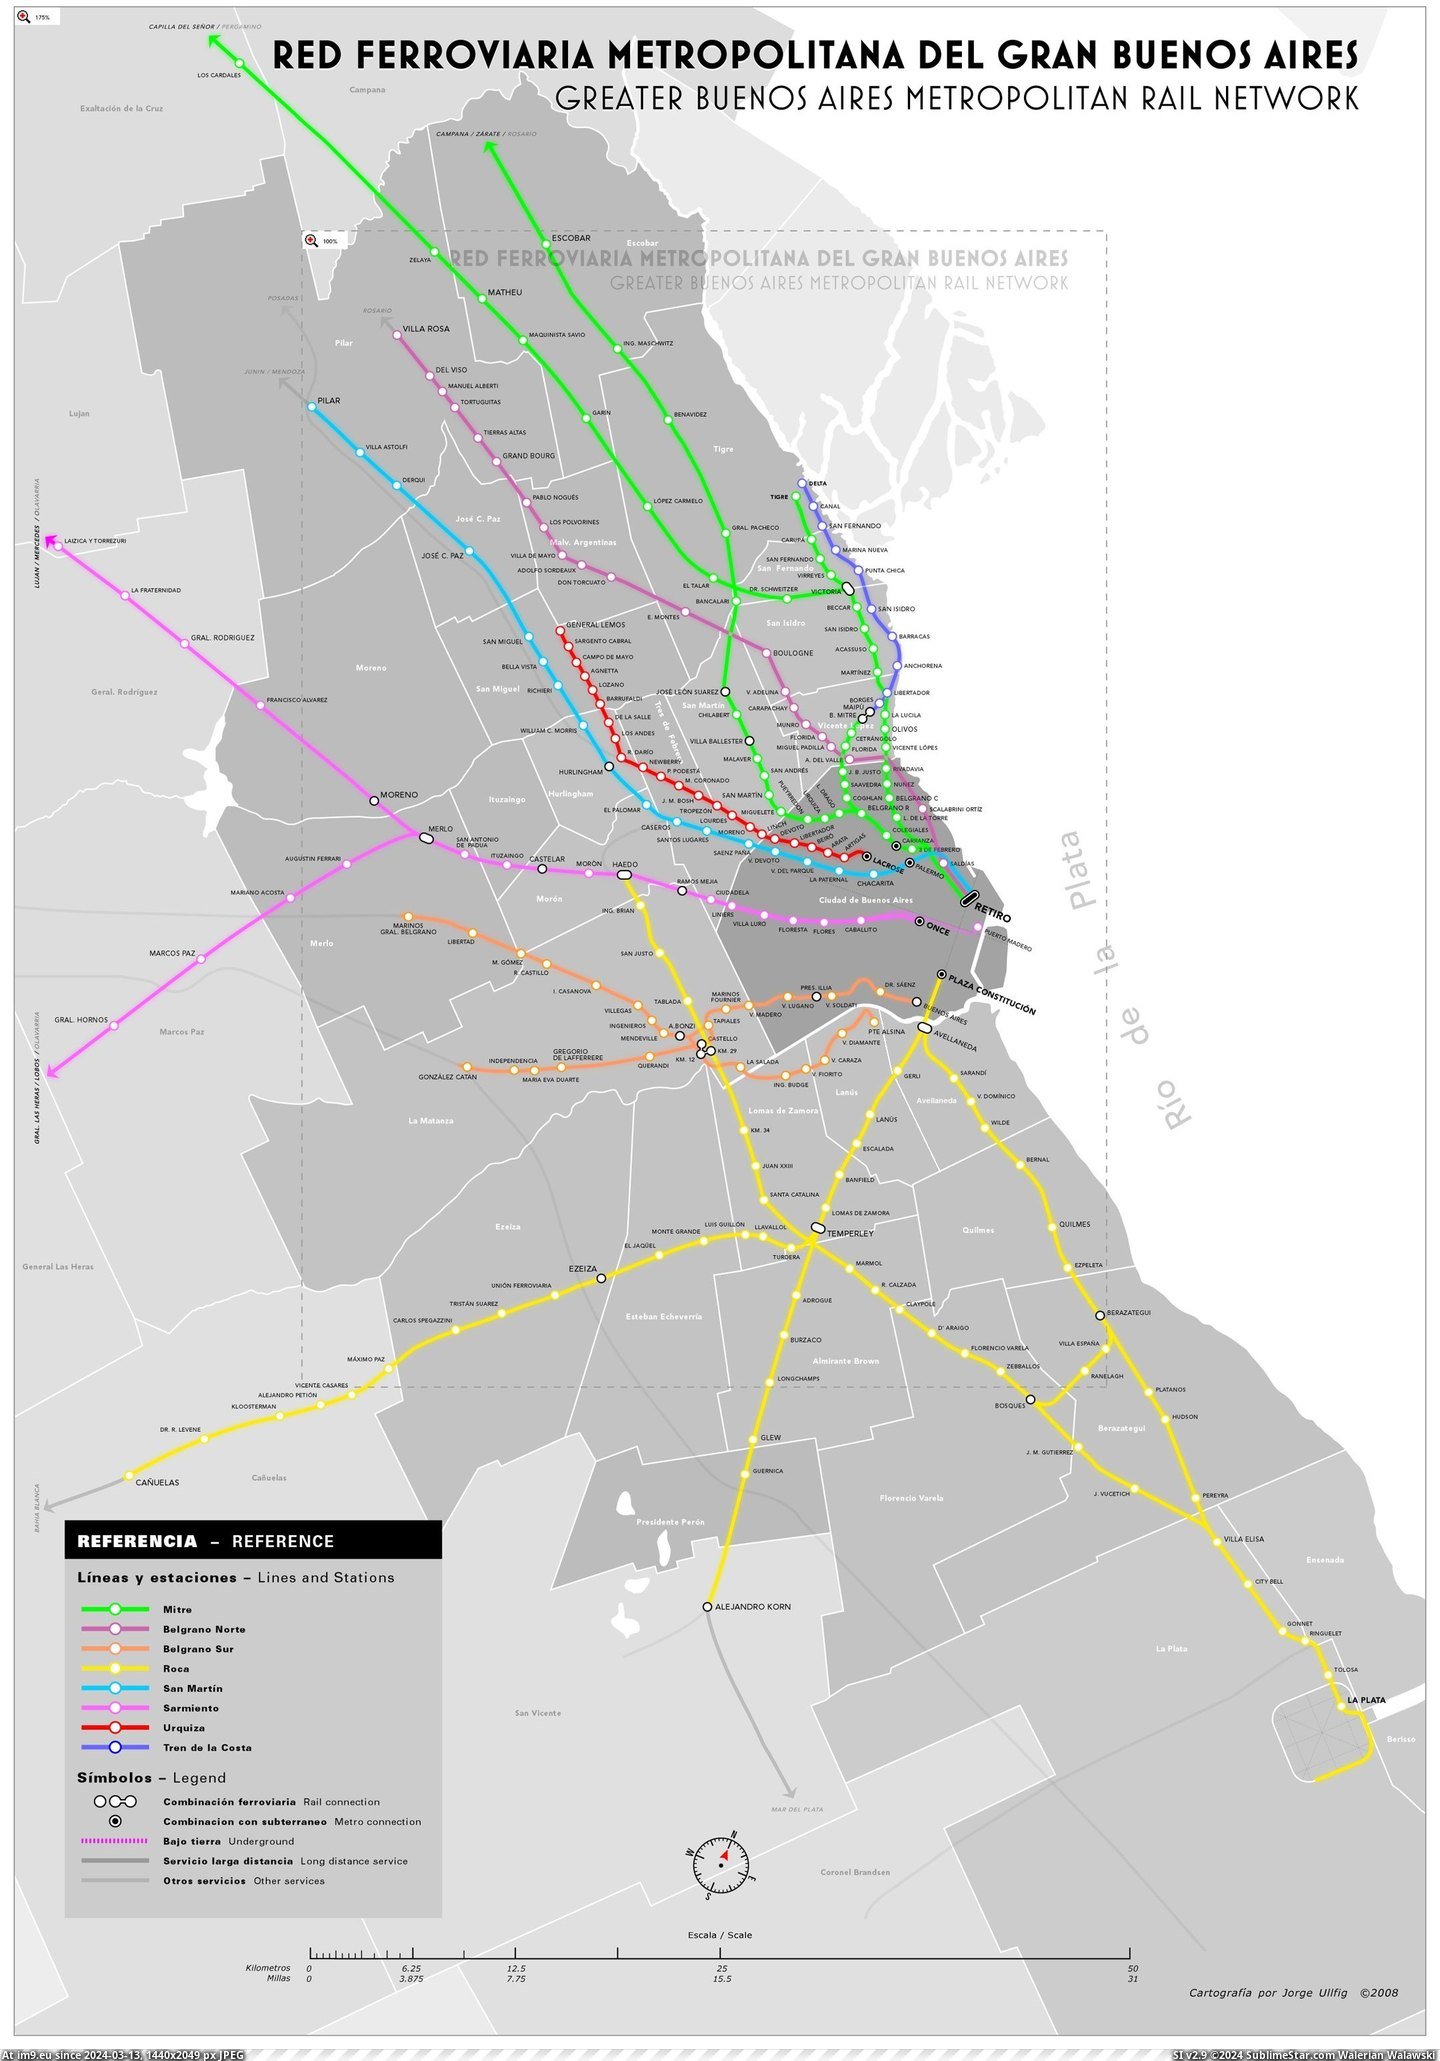 #Metropolitan #Network #Buenos #Aires #Rail #Greater [Mapporn] Greater Buenos Aires Metropolitan Rail Network [2160x3086] Pic. (Image of album My r/MAPS favs))